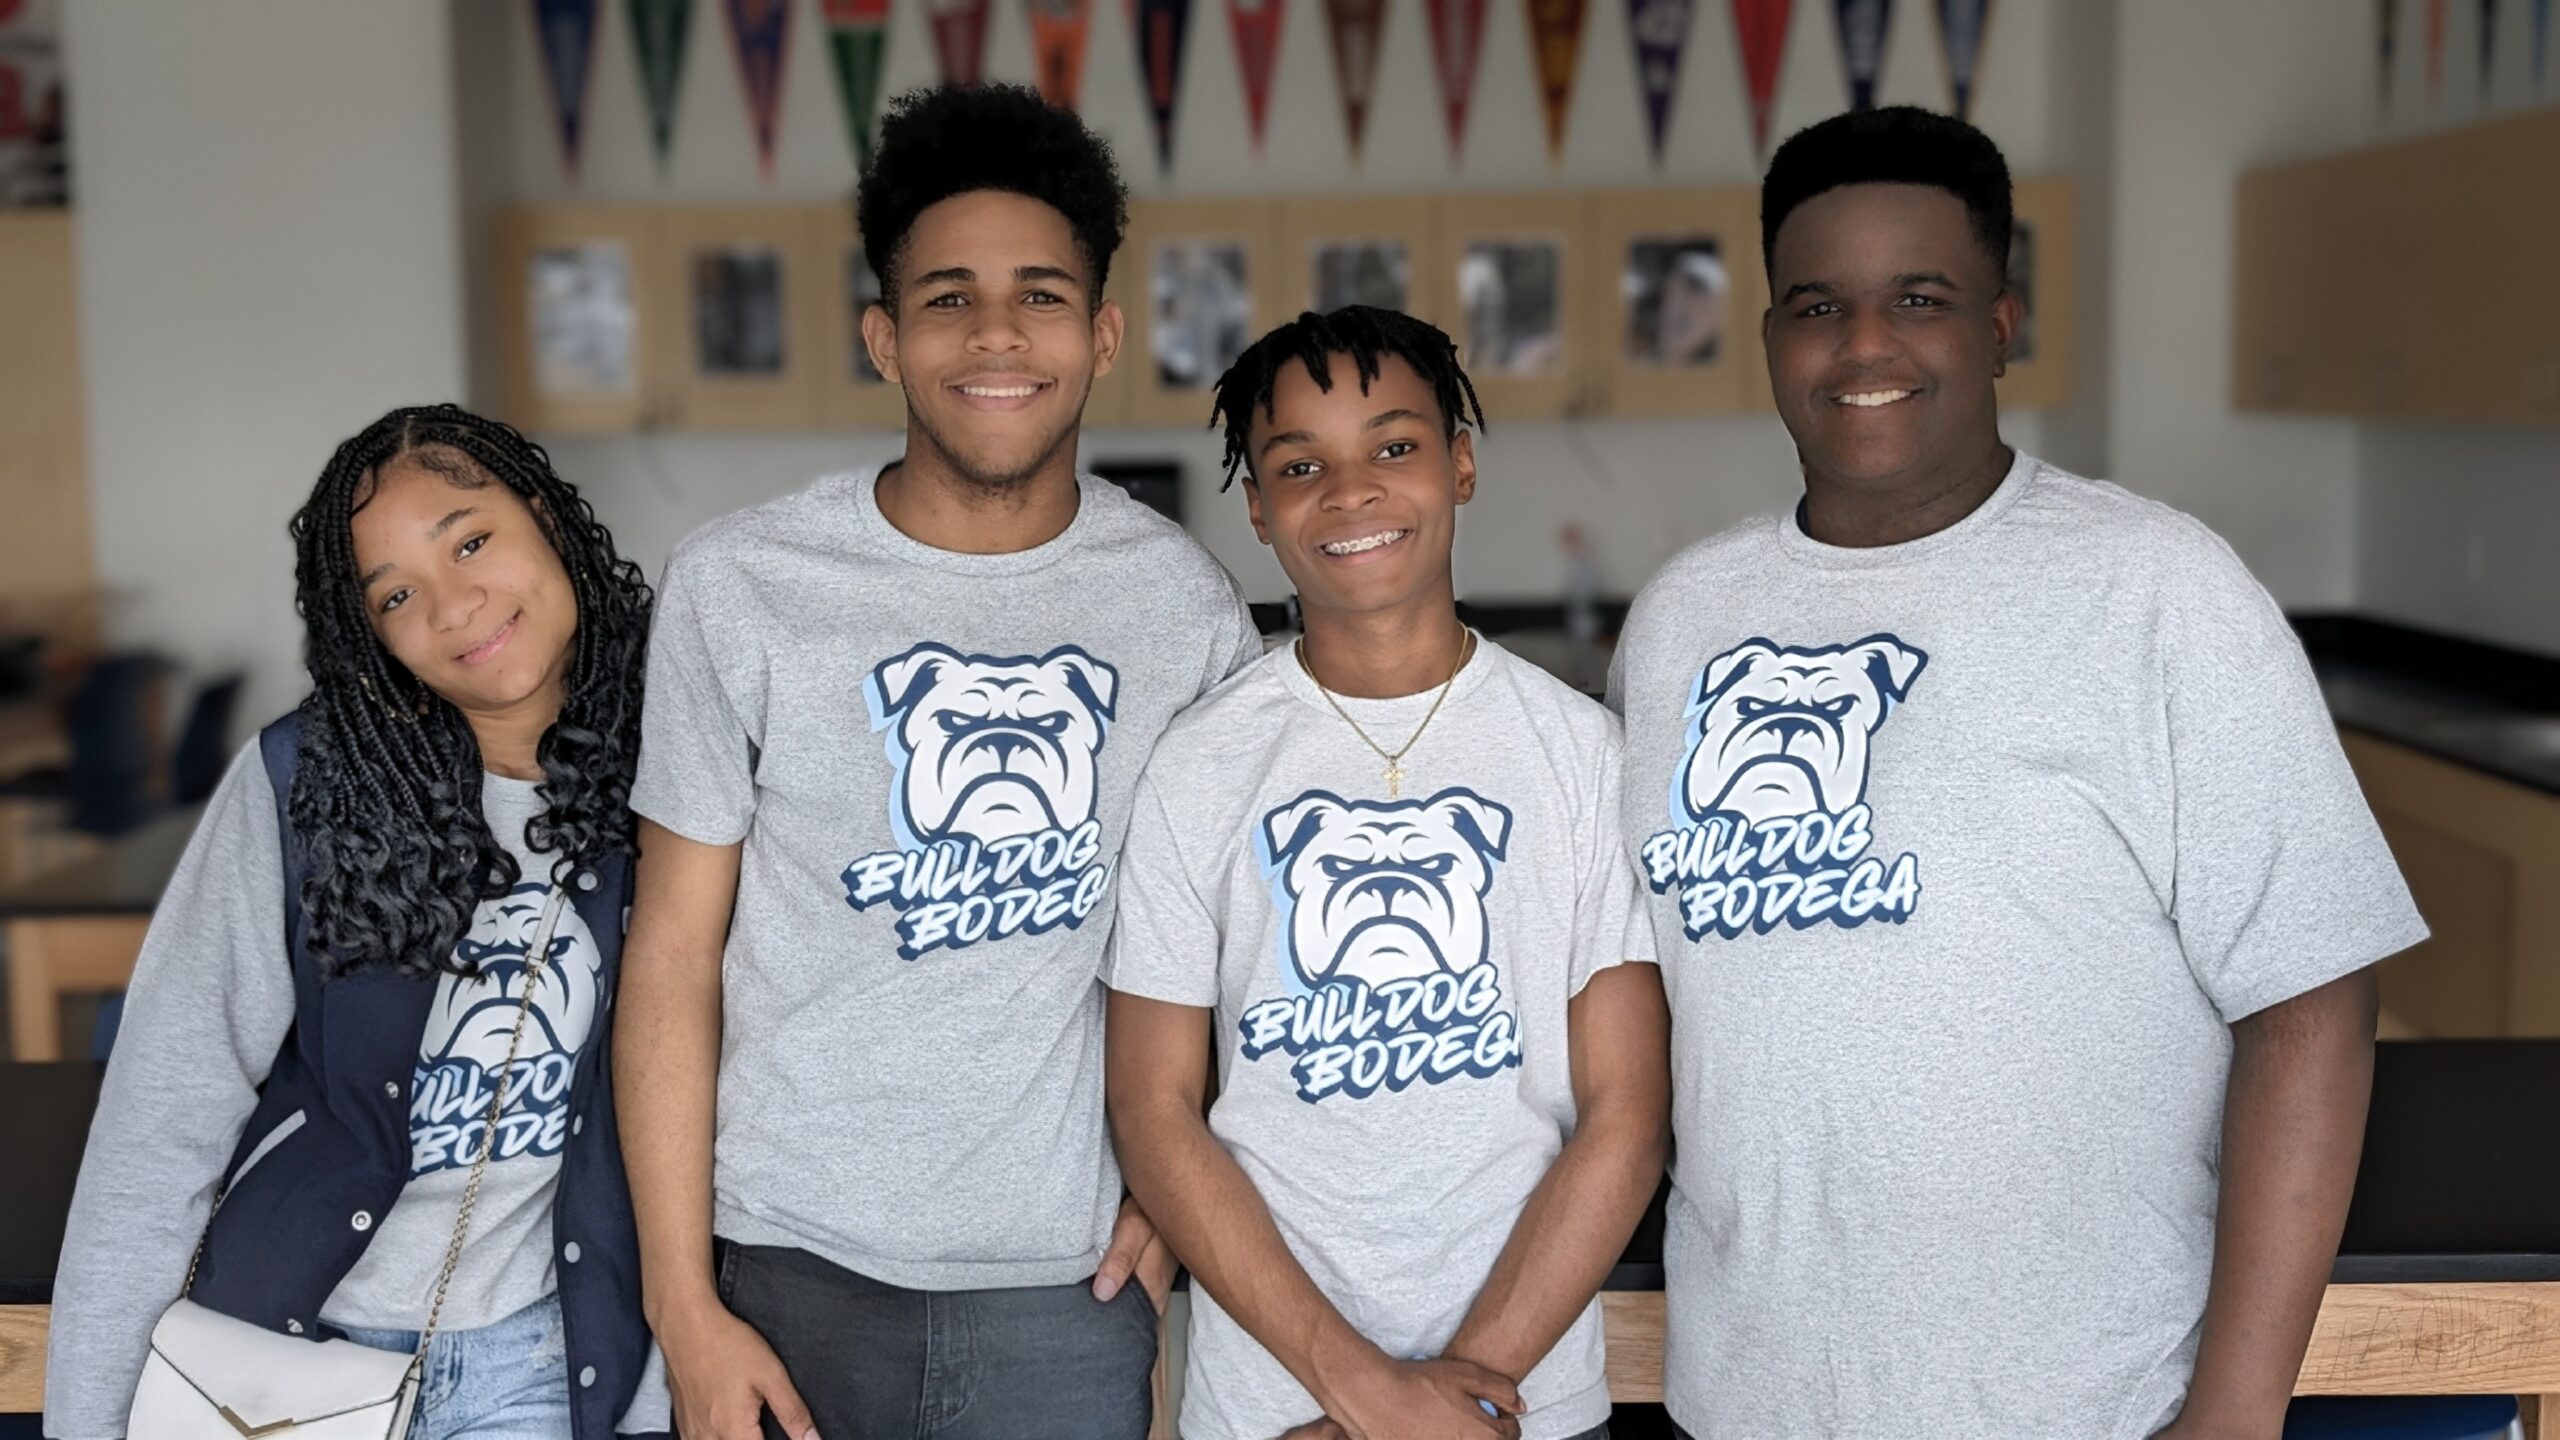 Legacy Students from the Bulldog Bodega post for photo